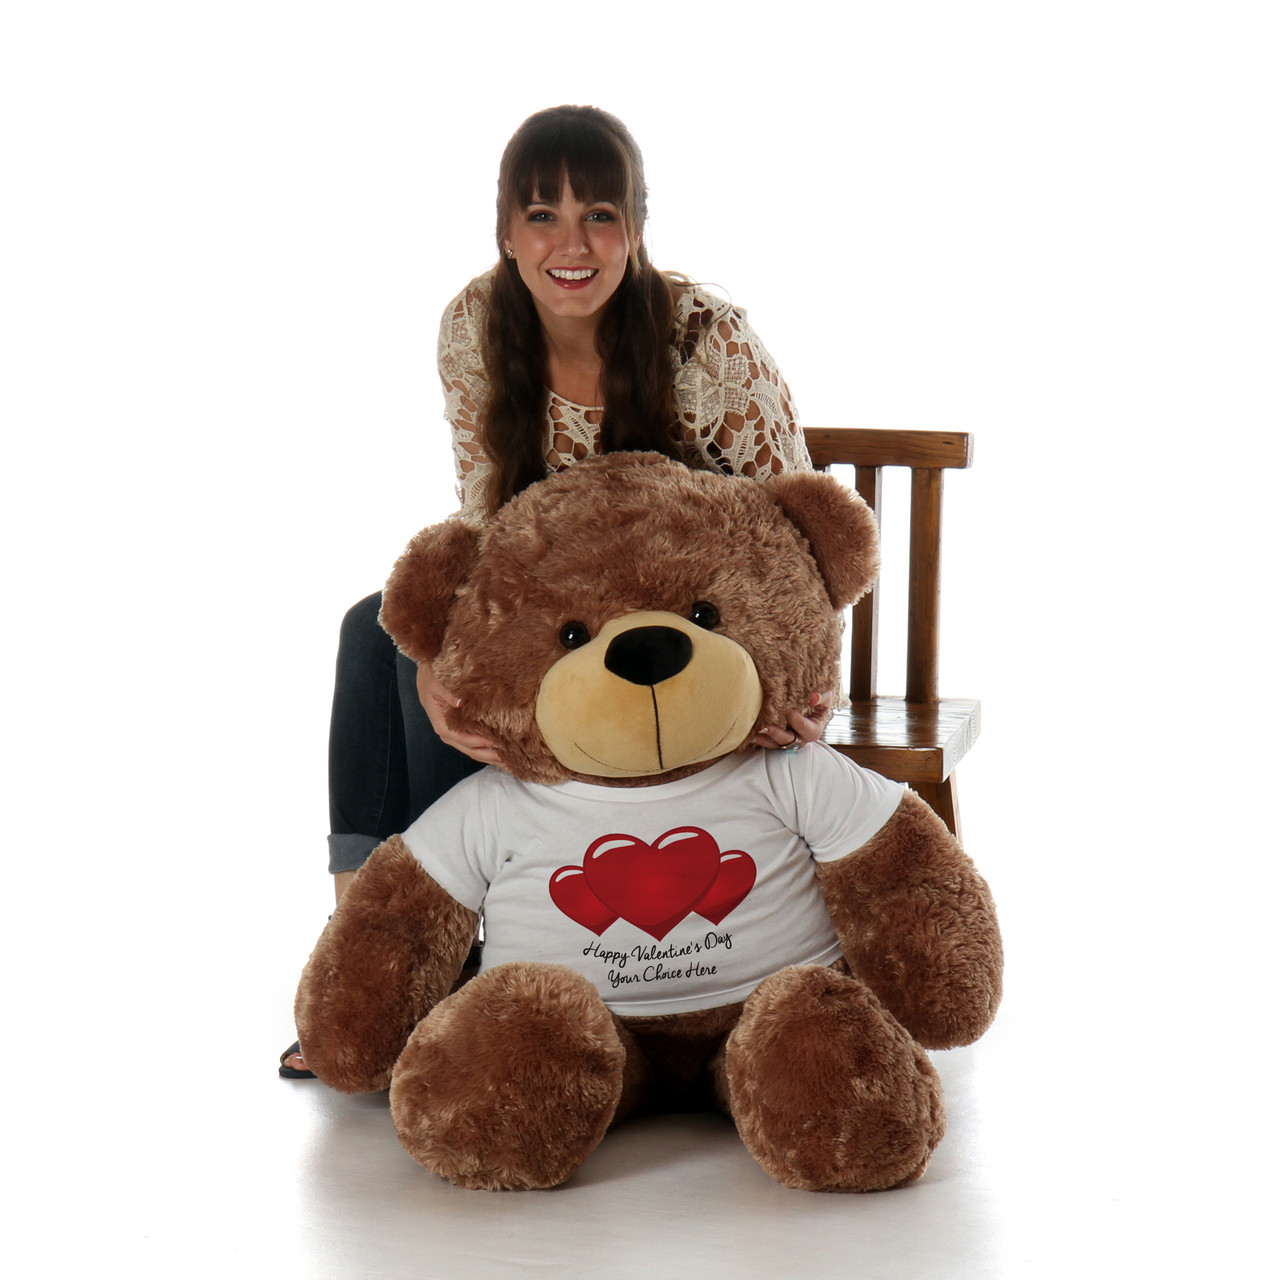 A woman with brown teddy bear having happy valentines day tshirt